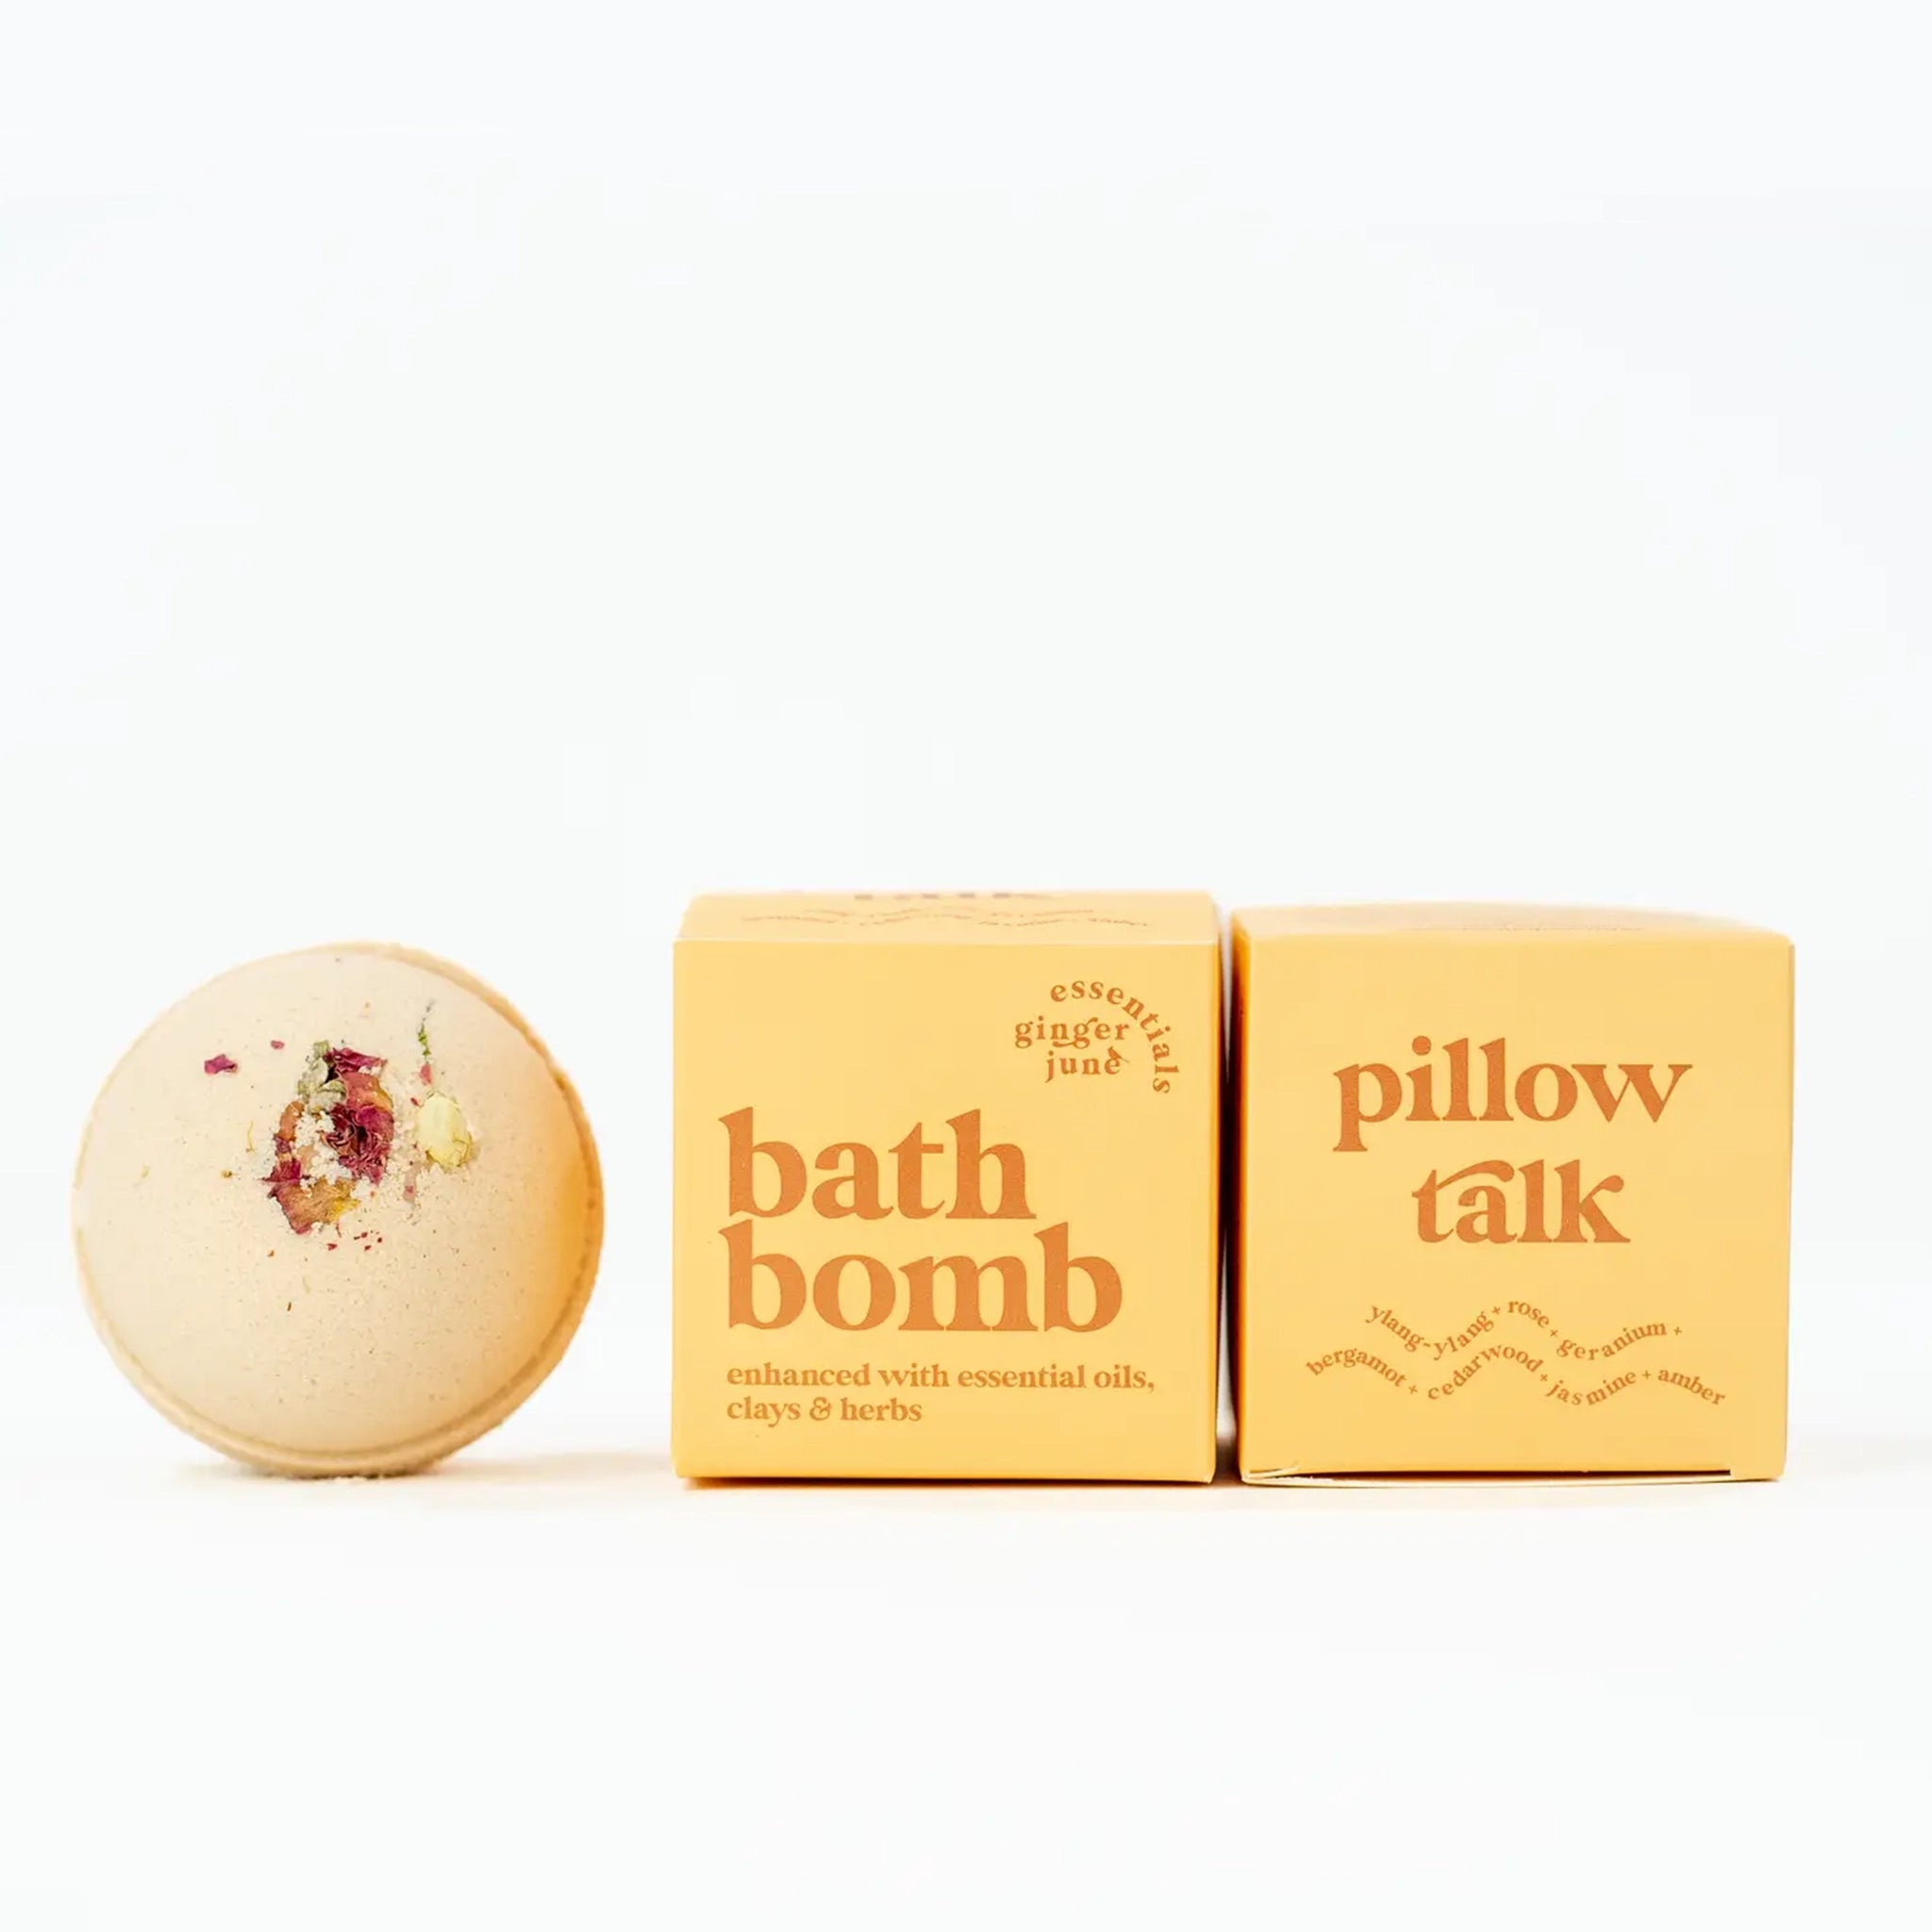 On a white background is a yellow bath bomb with a yellow box beside it that reads, "bath bomb enhanced with essential oils, clays and herbs". 